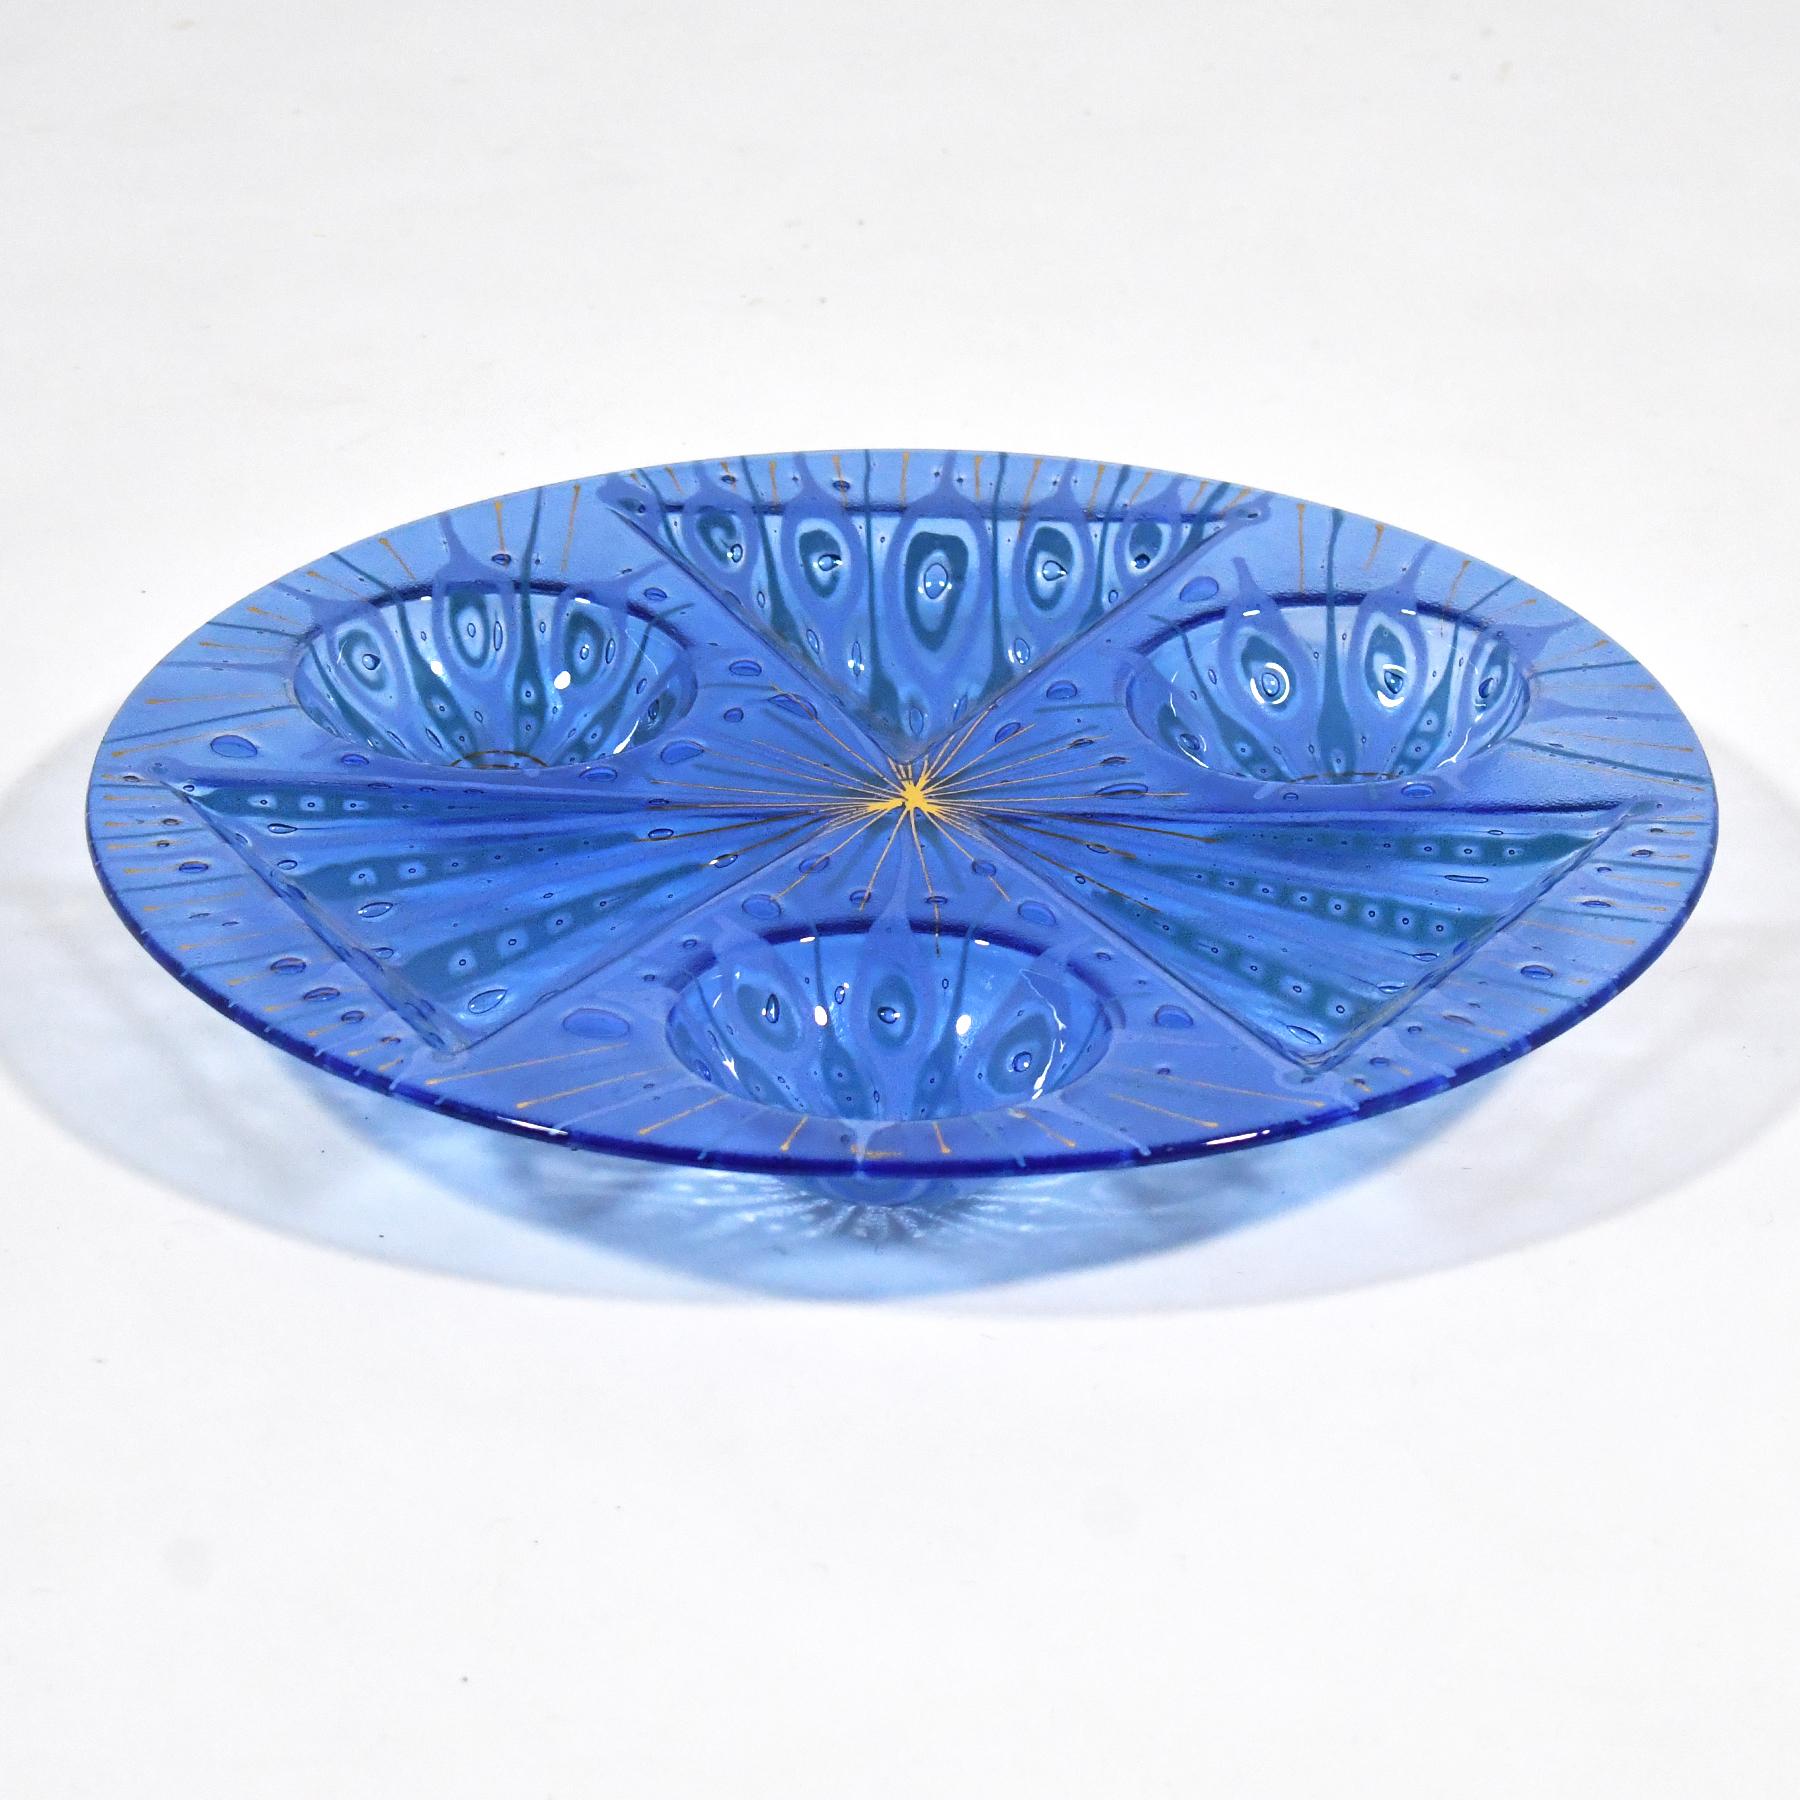 Michael and Frances Higgins’ distinctive designs in fused glass are rich and complex. This large tidbit or snack tray is a terrific example. The vivid peacock blue is accentuated with several layers adding to the visual and physical depth. There are